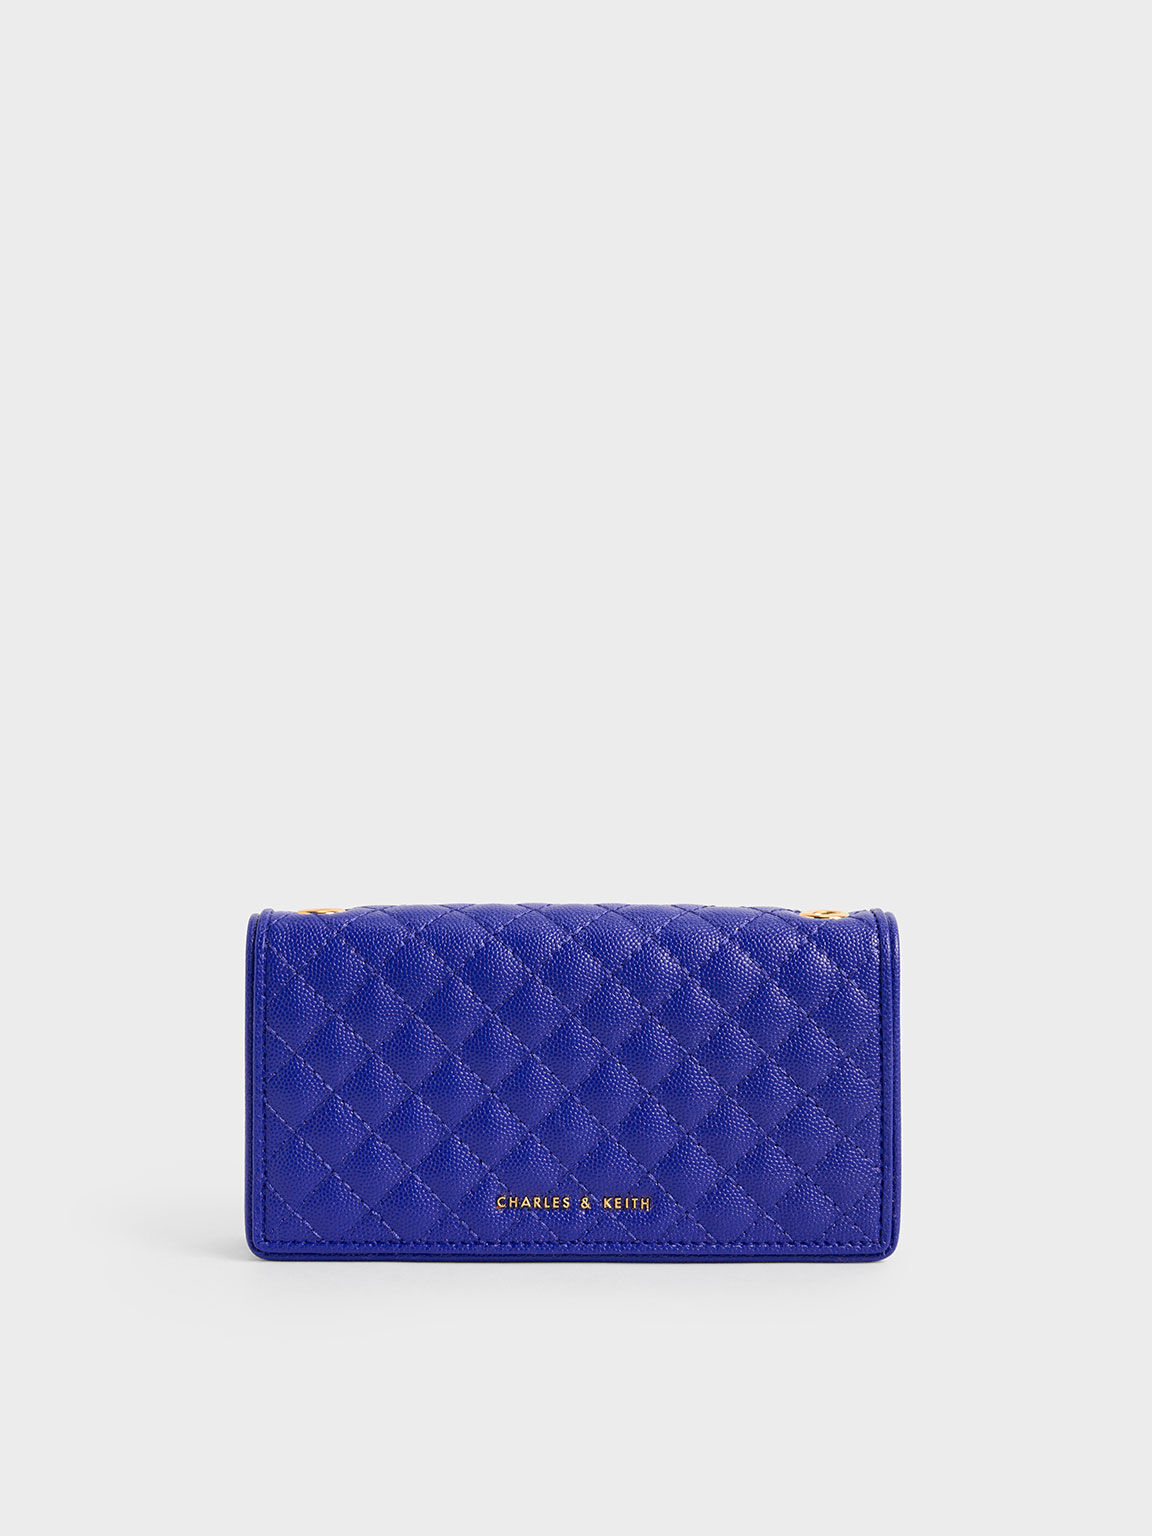 Quilted Pouch, Cobalt, hi-res